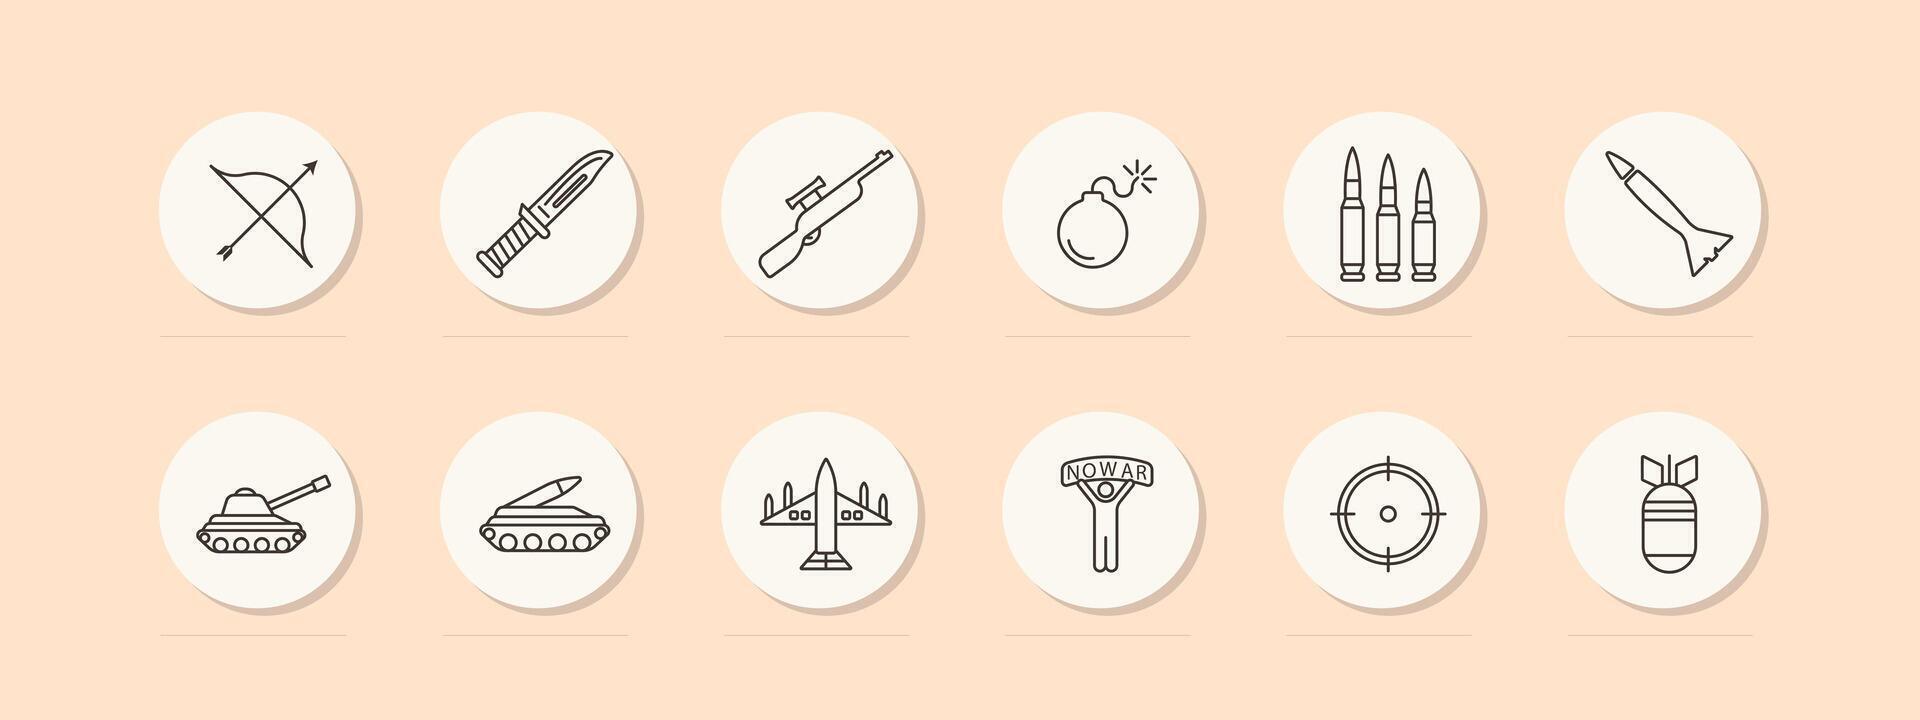 Weapon set icon. Tank, man, banner, no war, artillery, plane, pastel colors, military equipment, bow, rifle, knife. Third world countries, military operations in them concept. line icon. vector